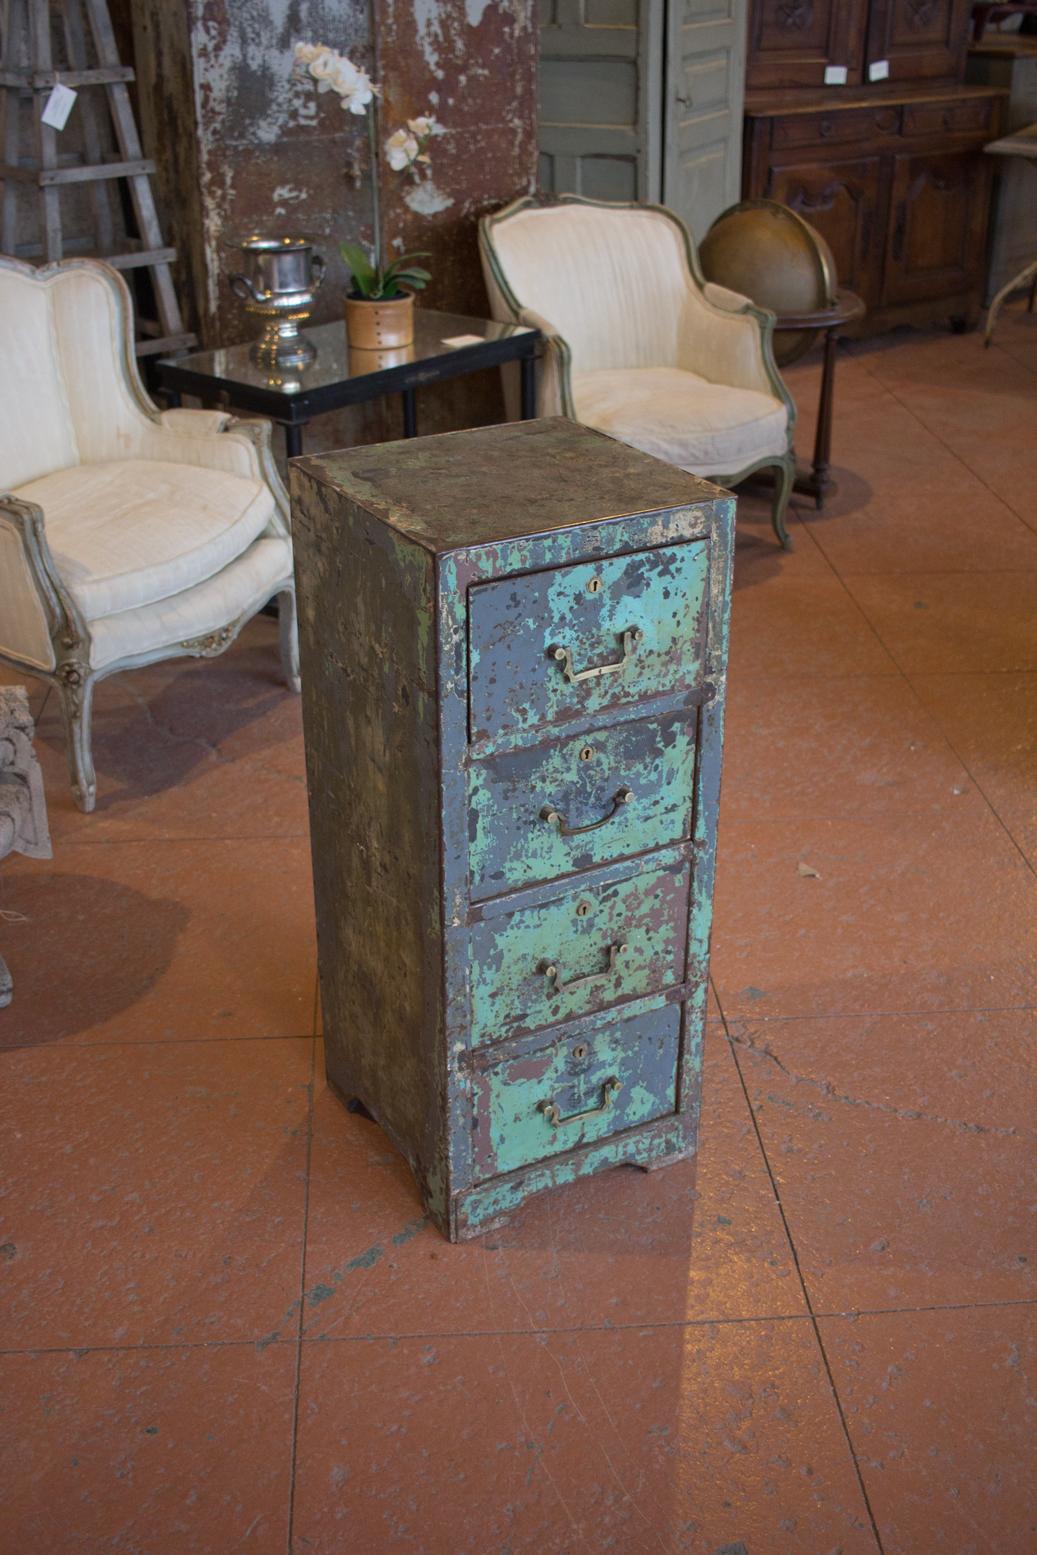 Vintage English metal filing cabinet. There are layers of residue old paint that has been sealed. It has 4 deep drawers, each one with brass handle and key hole.